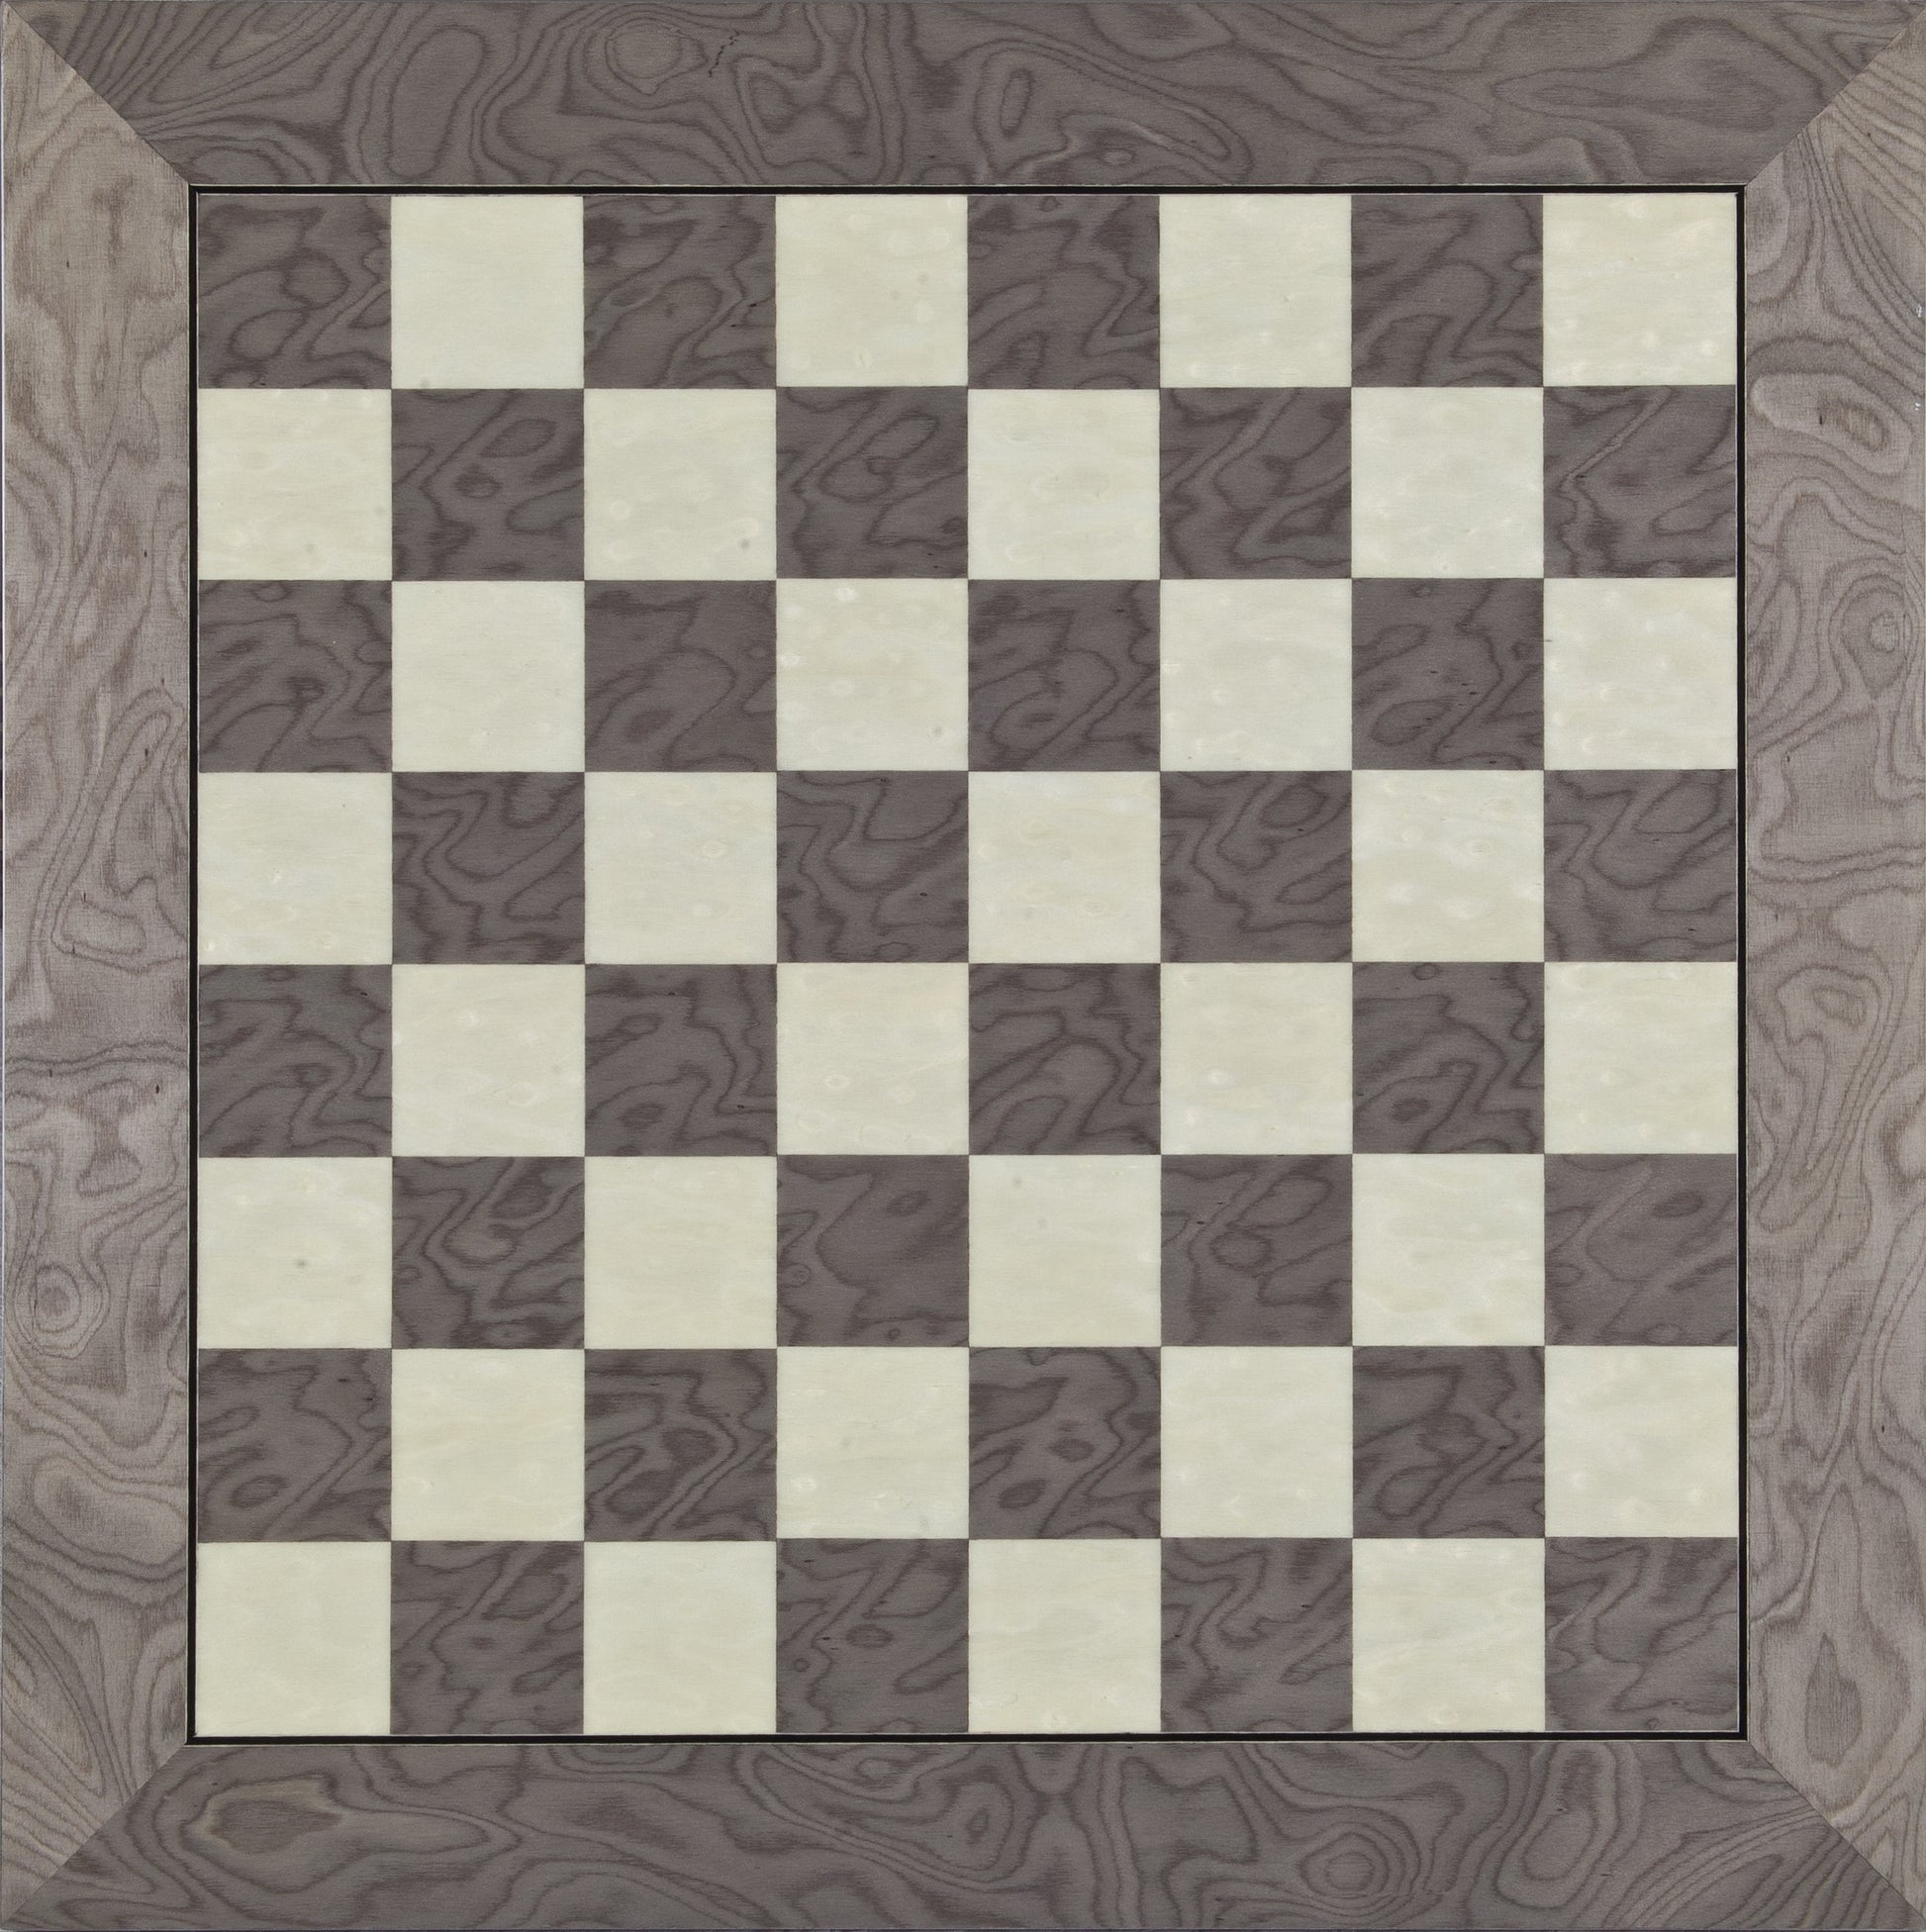 20 inch Superior Wood Chess Board